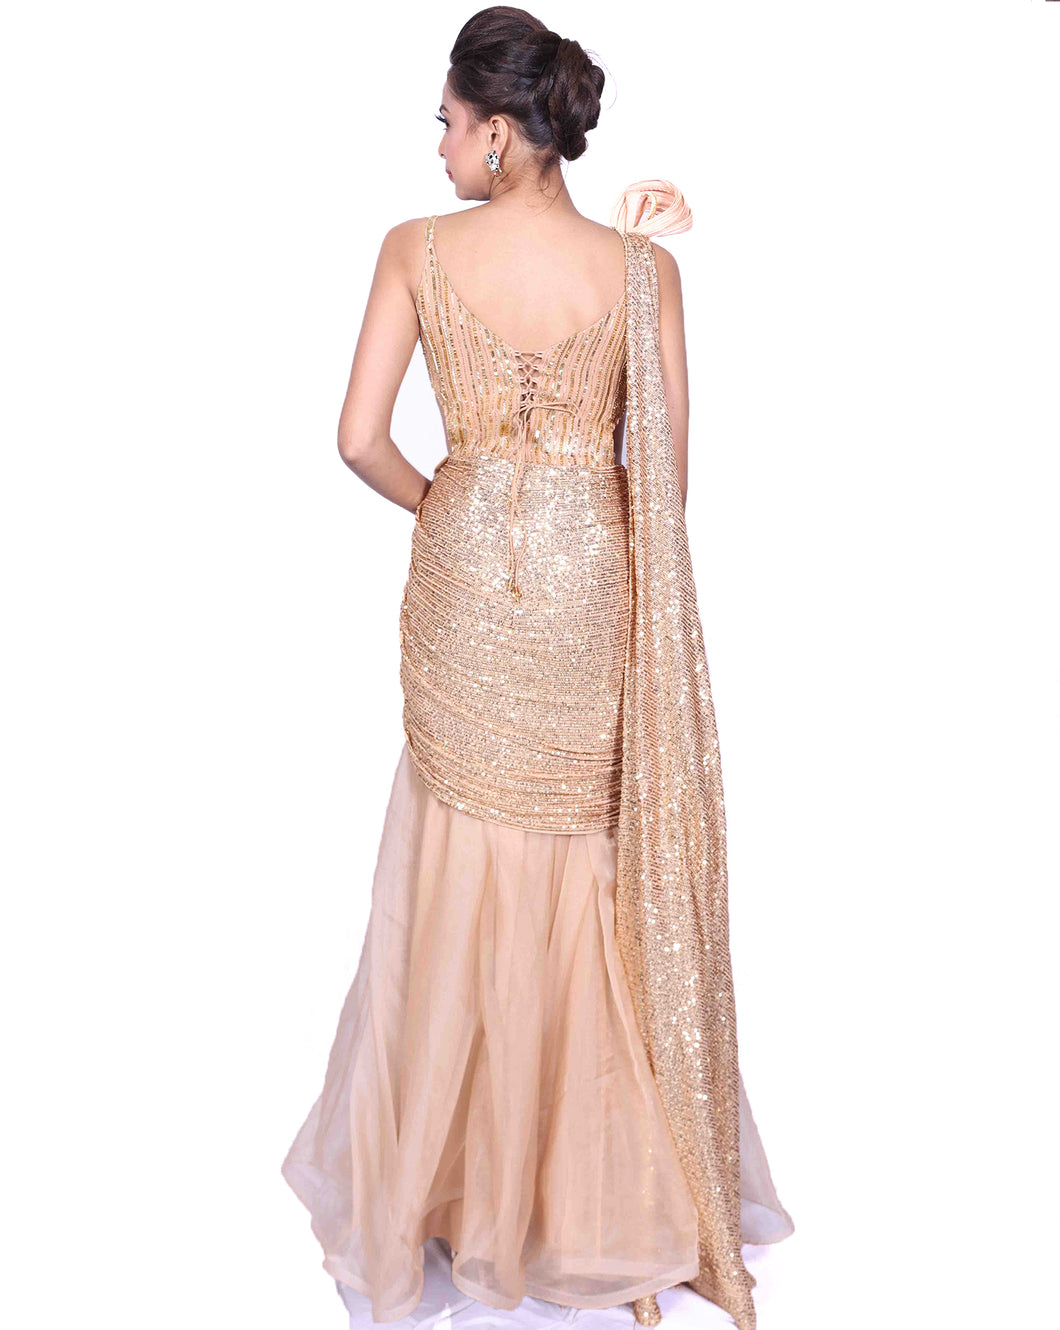 The Criss Cross Gold Gown